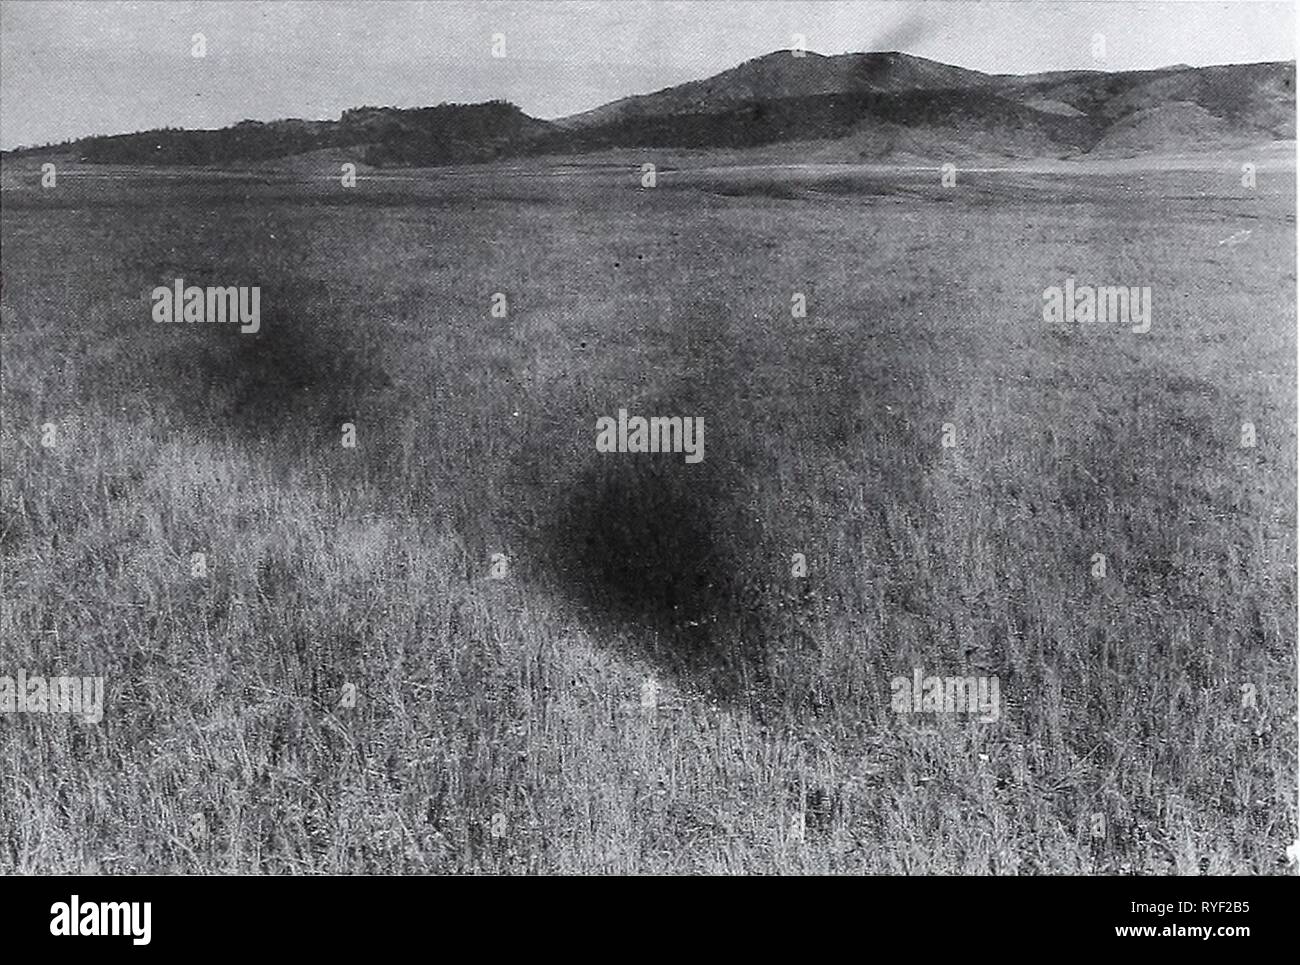 Eighty years of vegetation and landscape changes in the Northern Great Plains : a photographic record  eightyyearsofveg45klem Year: 2001  Original Photograph September 16, 1917. ShantzN-10-1917. Facing northwest. First Retake and Description August 6, 1960. W.S.P., B-5-1960. The original grass cover consisted of Bouteloua gracilis, Koeleria cristata, and Agropyron smithii, with pines on the hills. In the retake, the same plants are still present, but K. cristata seems to be dominant (from Phillips 1963, p. 43). Stock Photo